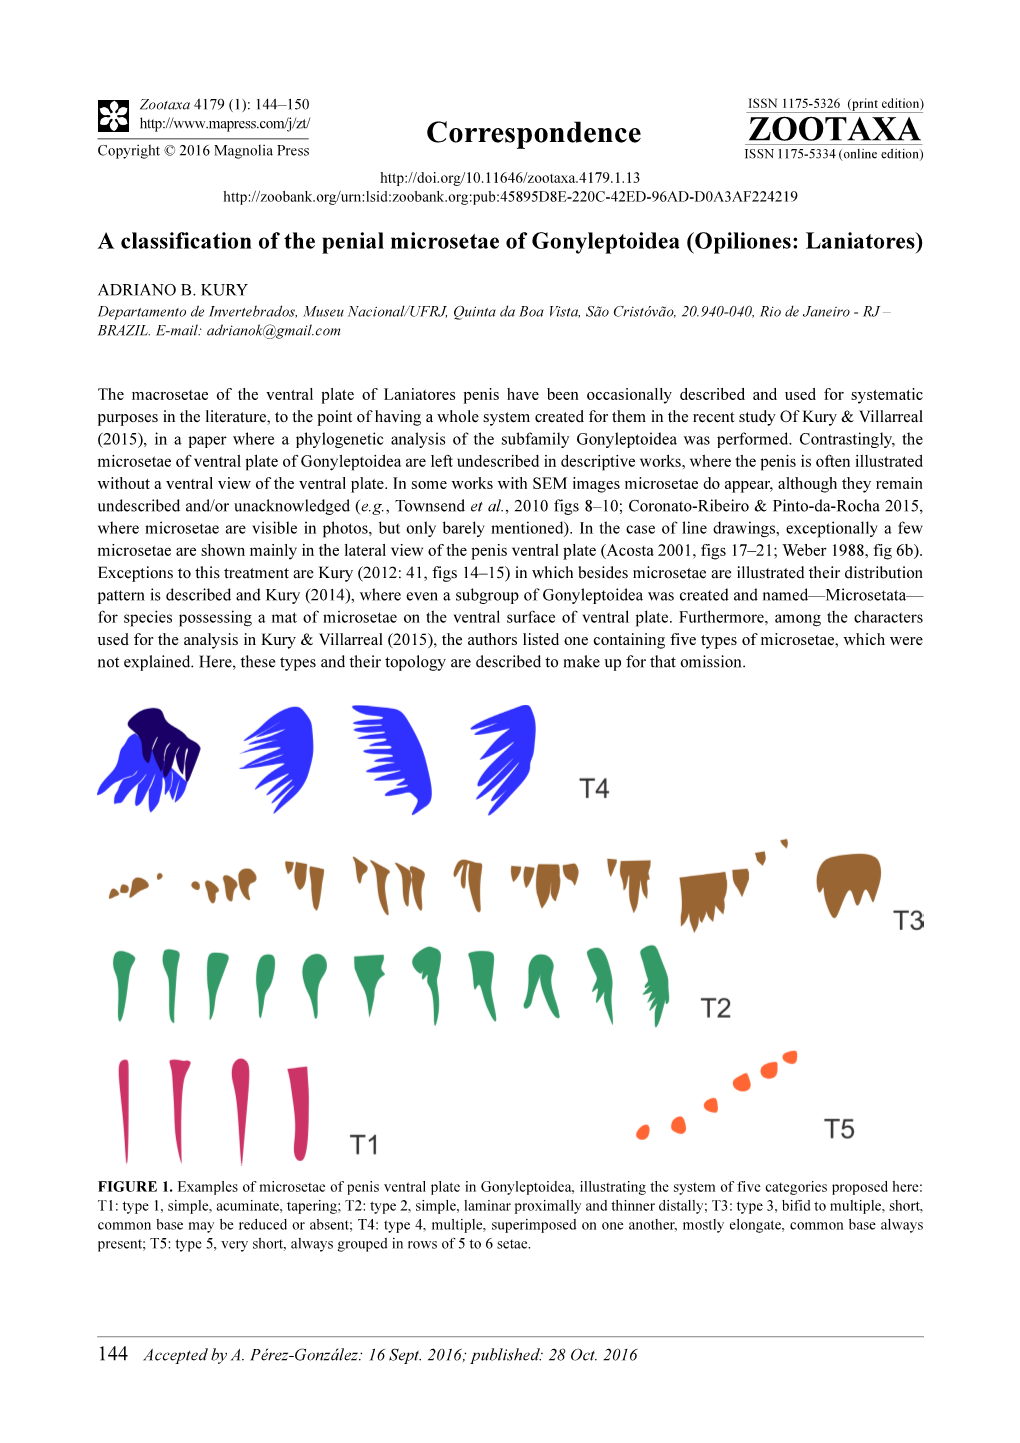 A Classification of the Penial Microsetae of Gonyleptoidea (Opiliones: Laniatores)